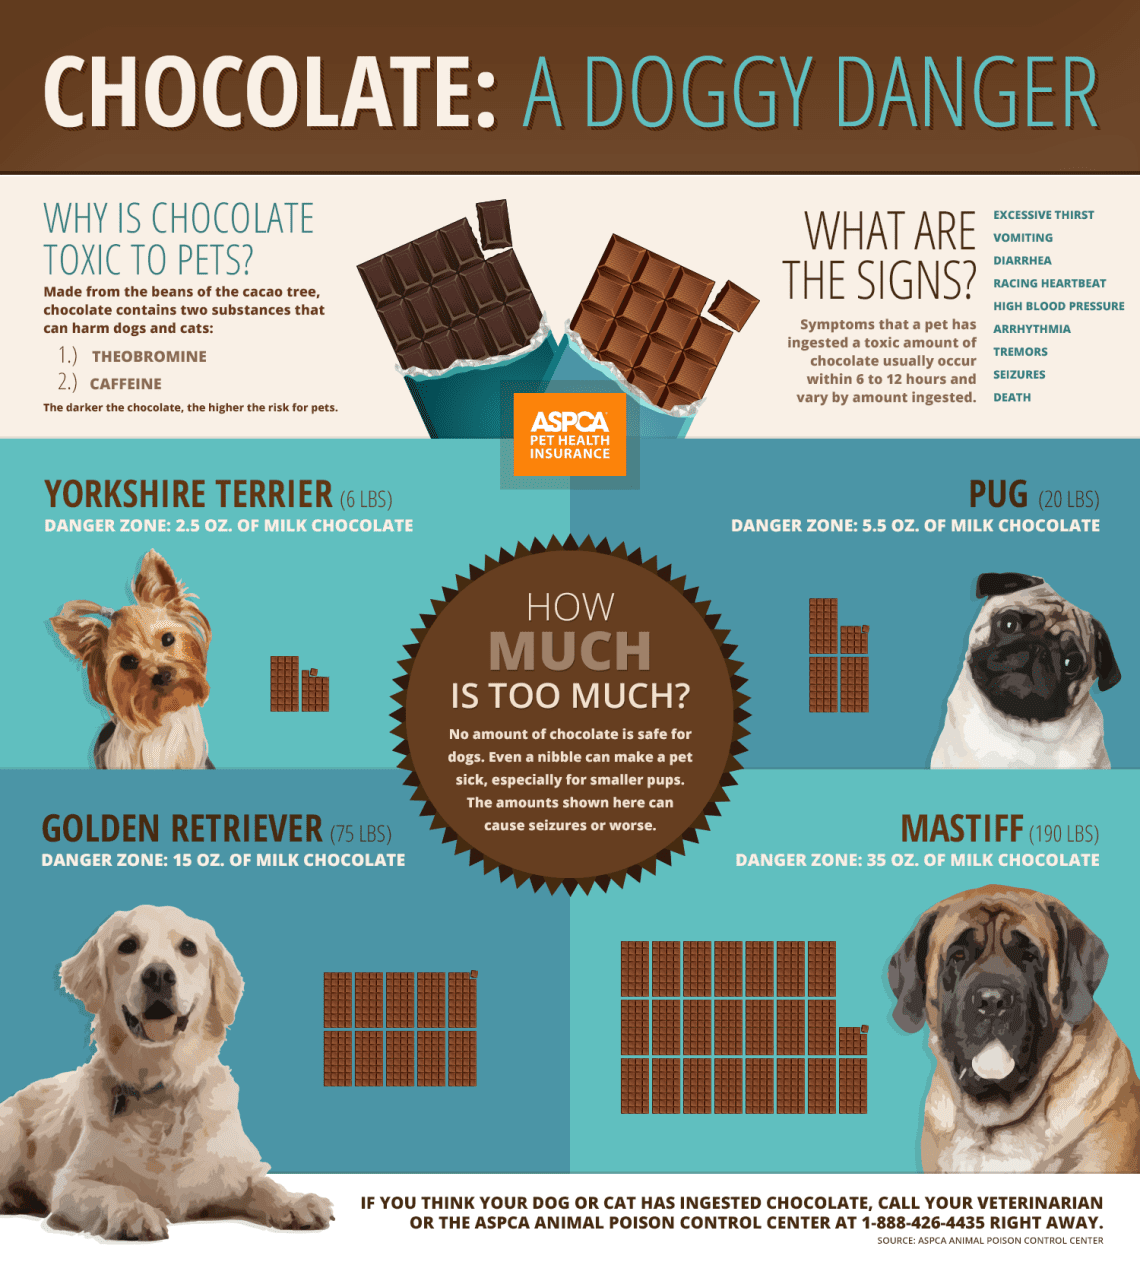 Why is chocolate dangerous for dogs?